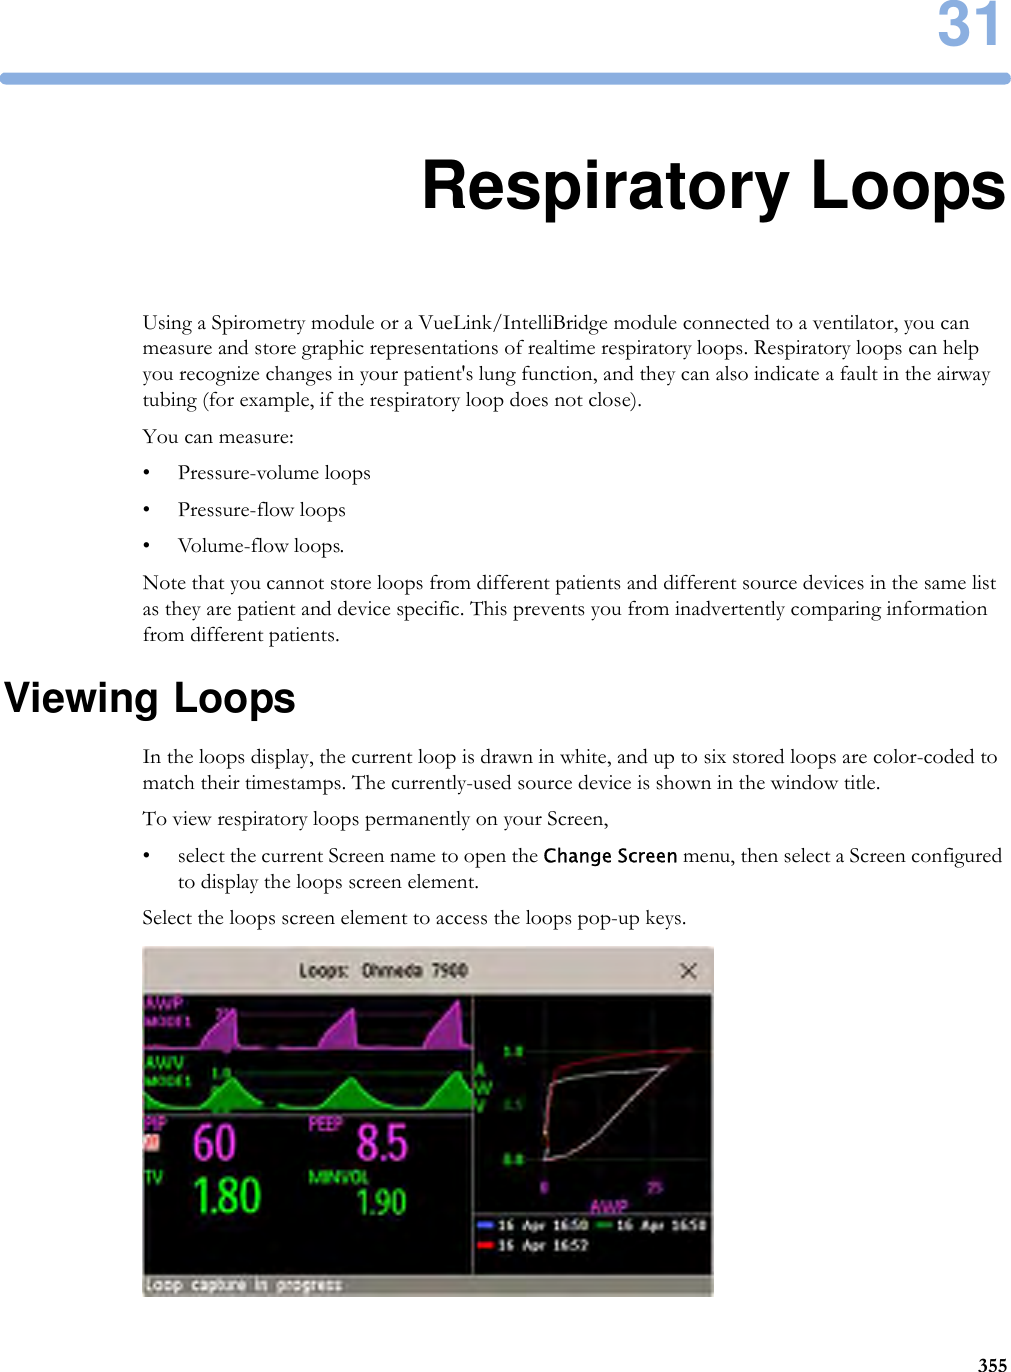 3135531Respiratory LoopsUsing a Spirometry module or a VueLink/IntelliBridge module connected to a ventilator, you can measure and store graphic representations of realtime respiratory loops. Respiratory loops can help you recognize changes in your patient&apos;s lung function, and they can also indicate a fault in the airway tubing (for example, if the respiratory loop does not close).You can measure:• Pressure-volume loops• Pressure-flow loops• Volume-flow loops.Note that you cannot store loops from different patients and different source devices in the same list as they are patient and device specific. This prevents you from inadvertently comparing information from different patients.Viewing LoopsIn the loops display, the current loop is drawn in white, and up to six stored loops are color-coded to match their timestamps. The currently-used source device is shown in the window title.To view respiratory loops permanently on your Screen,• select the current Screen name to open the Change Screen menu, then select a Screen configured to display the loops screen element.Select the loops screen element to access the loops pop-up keys.